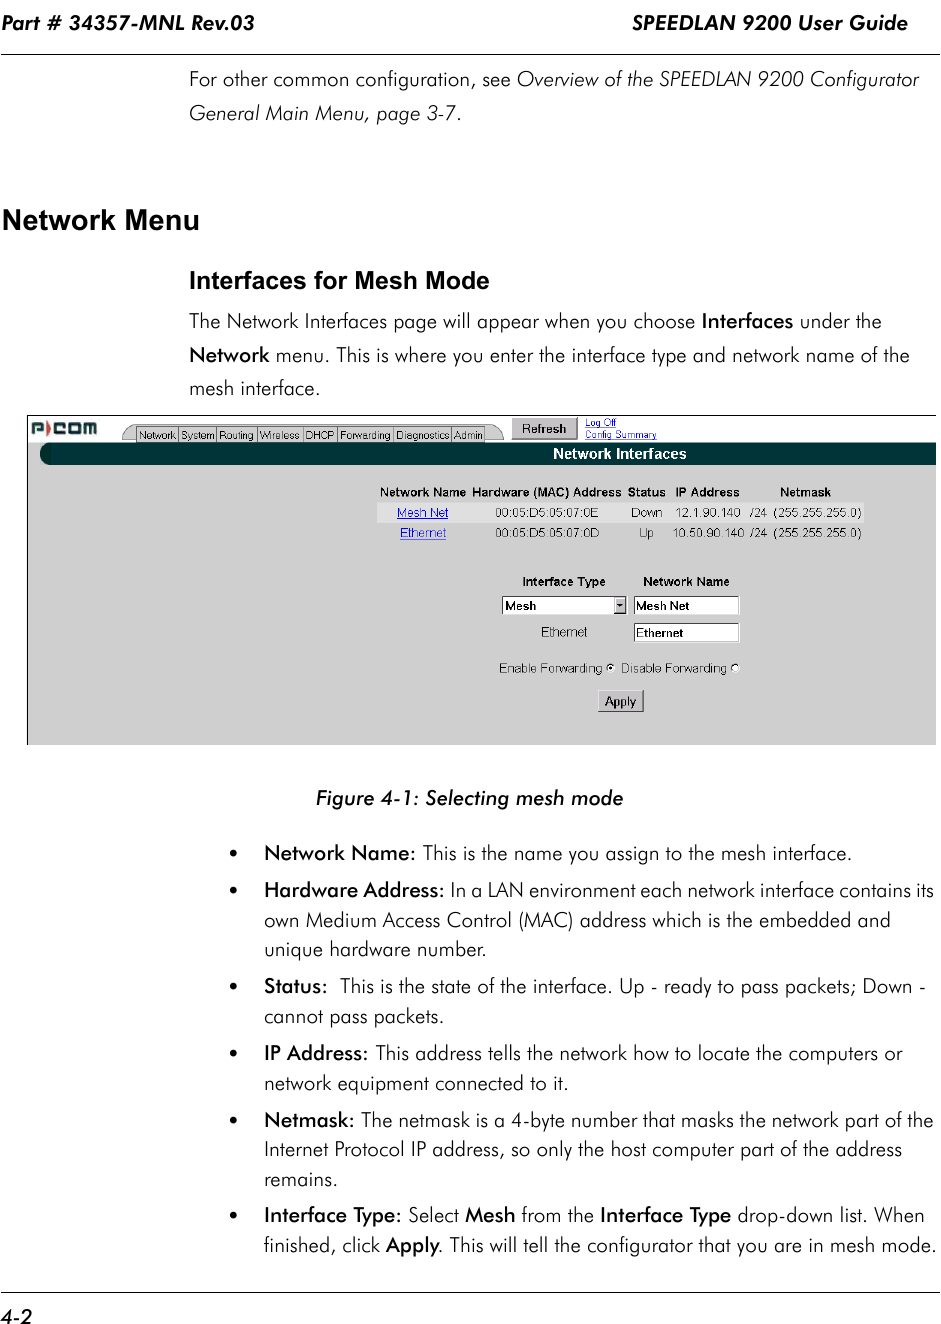 Part # 34357-MNL Rev.03                                                             SPEEDLAN 9200 User Guide 4-2For other common configuration, see Overview of the SPEEDLAN 9200 Configurator General Main Menu, page 3-7. Network MenuInterfaces for Mesh ModeThe Network Interfaces page will appear when you choose Interfaces under the Network menu. This is where you enter the interface type and network name of the mesh interface.    Figure 4-1: Selecting mesh mode•Network Name: This is the name you assign to the mesh interface.•Hardware Address: In a LAN environment each network interface contains its own Medium Access Control (MAC) address which is the embedded and unique hardware number. •Status:  This is the state of the interface. Up - ready to pass packets; Down - cannot pass packets.•IP Address: This address tells the network how to locate the computers or network equipment connected to it.  •Netmask: The netmask is a 4-byte number that masks the network part of the Internet Protocol IP address, so only the host computer part of the address remains.•Interface Type: Select Mesh from the Interface Type drop-down list. When finished, click Apply. This will tell the configurator that you are in mesh mode.             